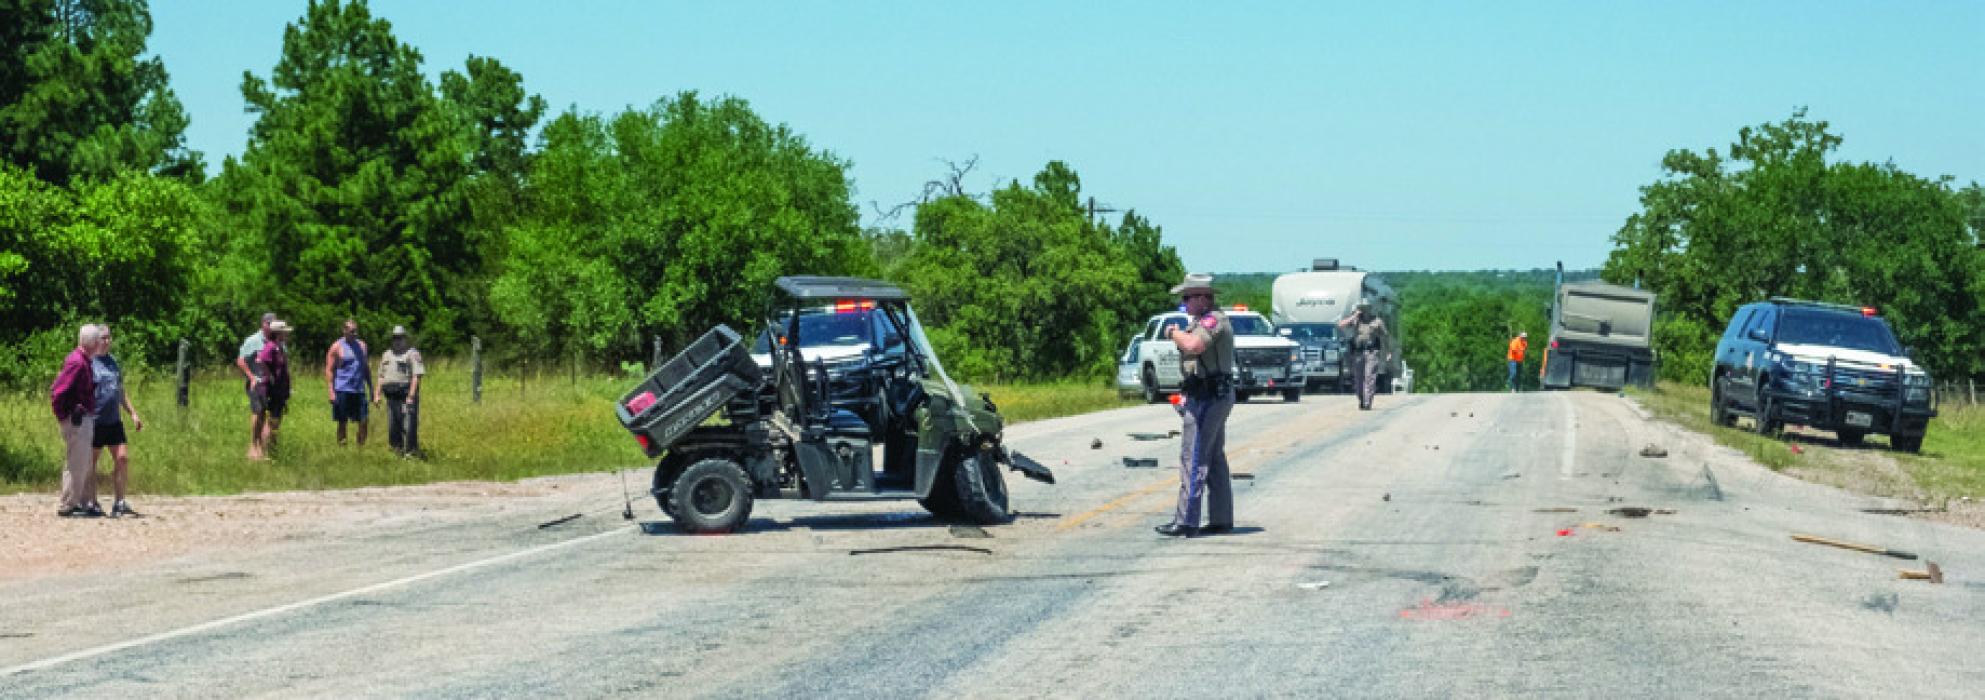 A local man driving a Polaris Ranger died following a crash with an 18-wheeler on SH 159 in Rek Hill Tuesday, May 19. Photo by Andy Behlen